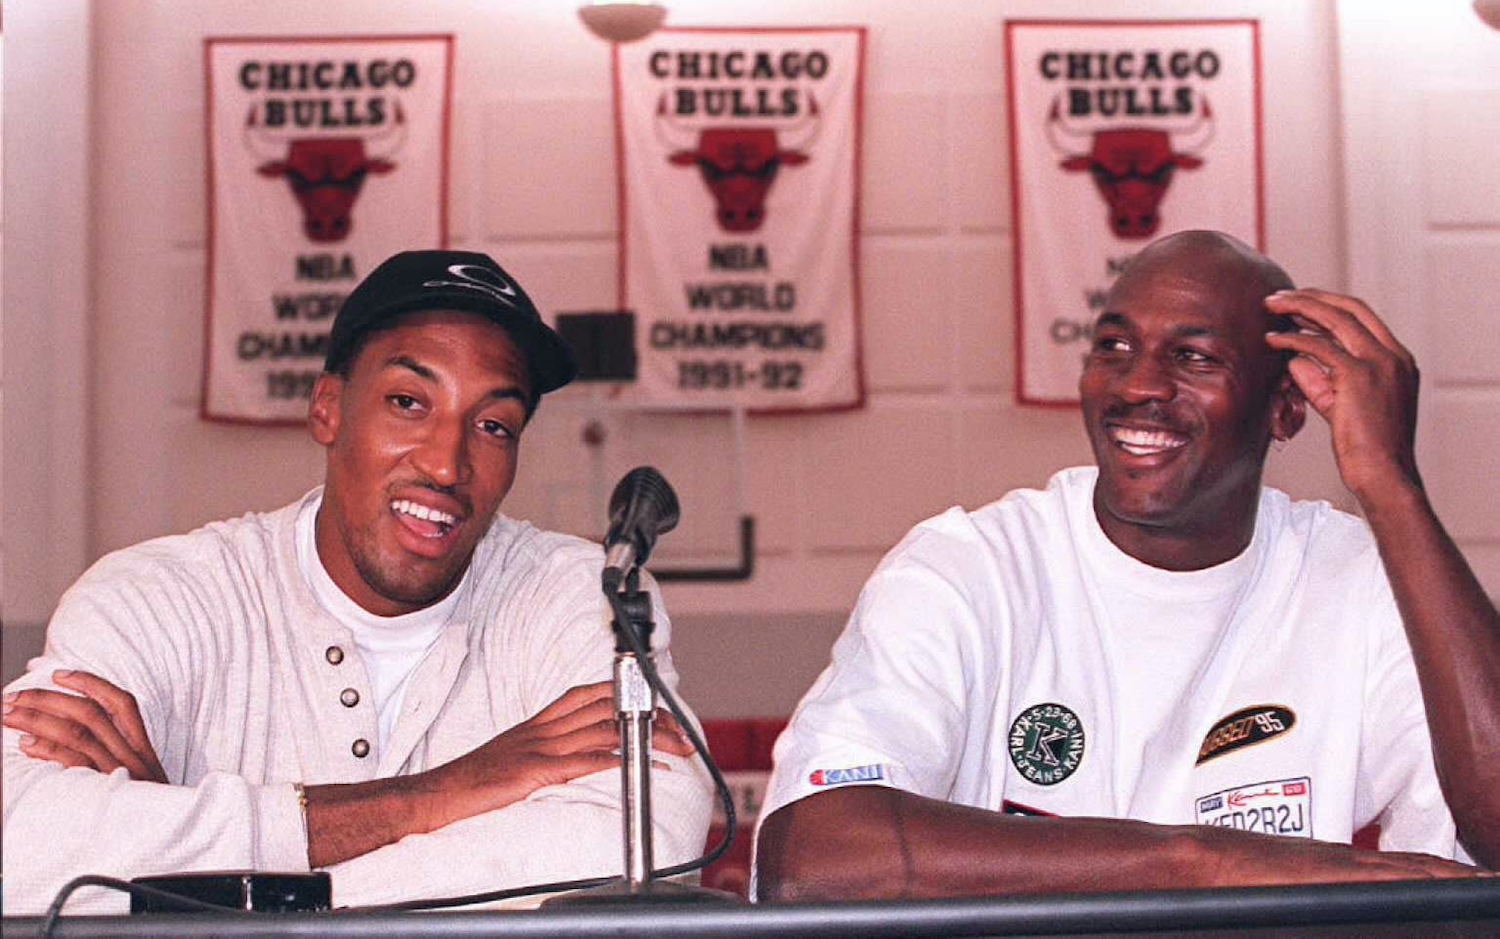 Michael Jordan and Scottie Pippen sit together at a Chicago Bulls press conference.